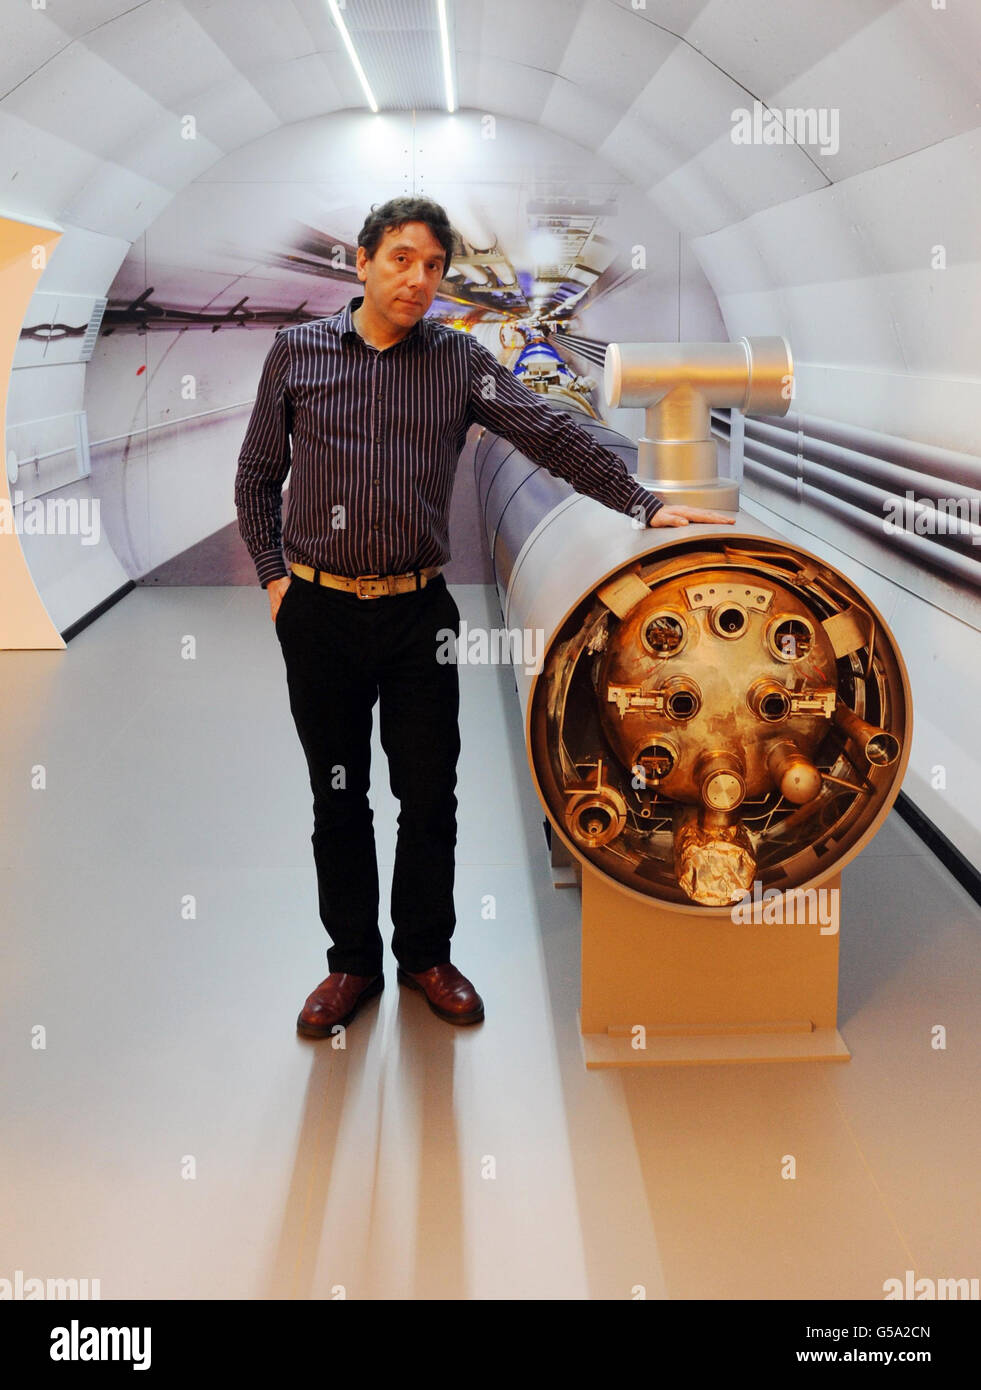 University College London Professor John Butterworth, a scientist on the Atlas experiment, whose findings are being announced today, stands with a model of the Large Hadron Collider in London. Stock Photo